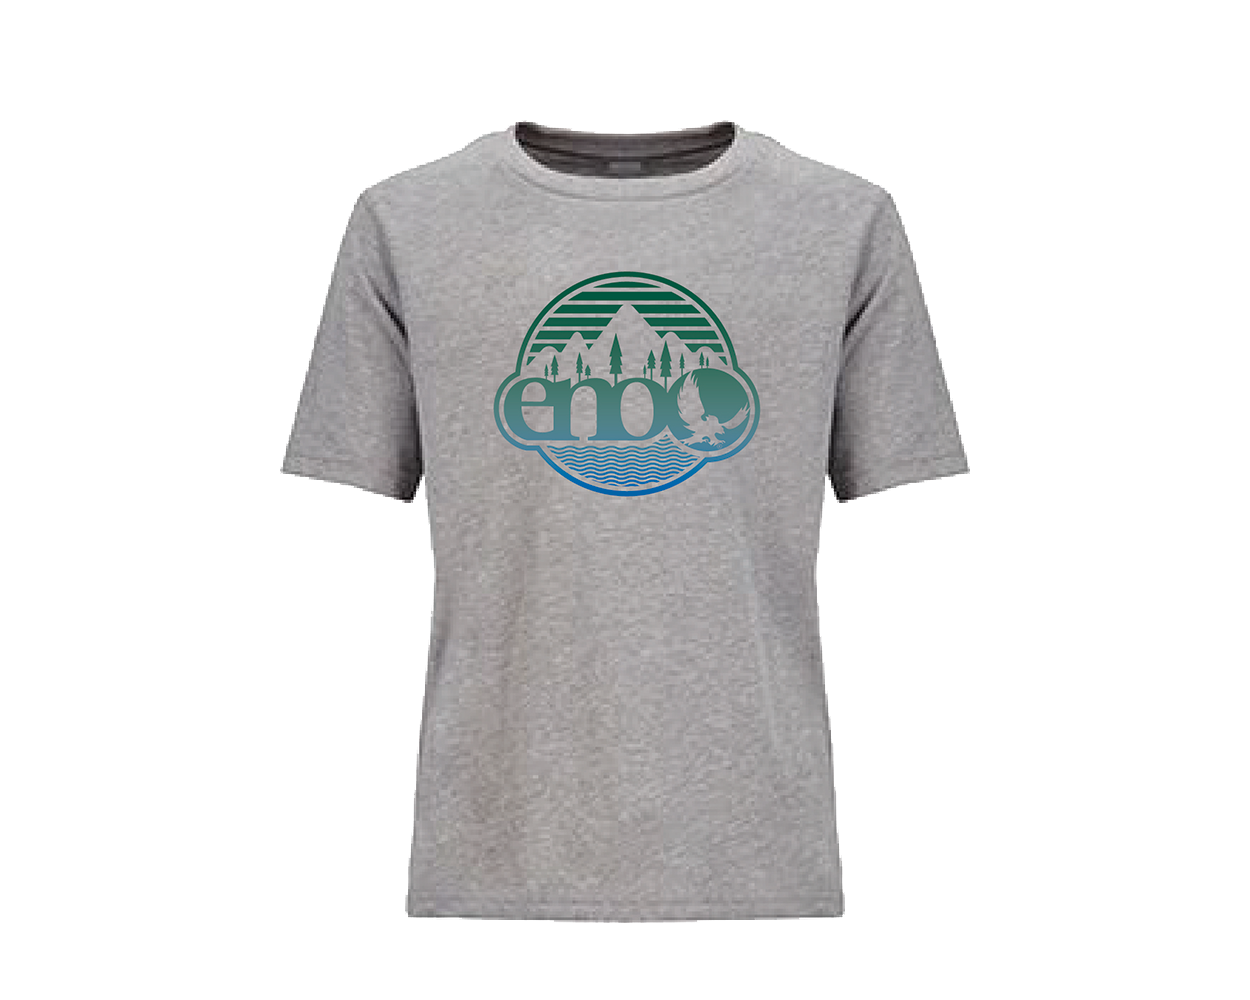 Eagles Nest Outfitters, Inc. Apparel & Merch, ENO Youth's Nature Tee